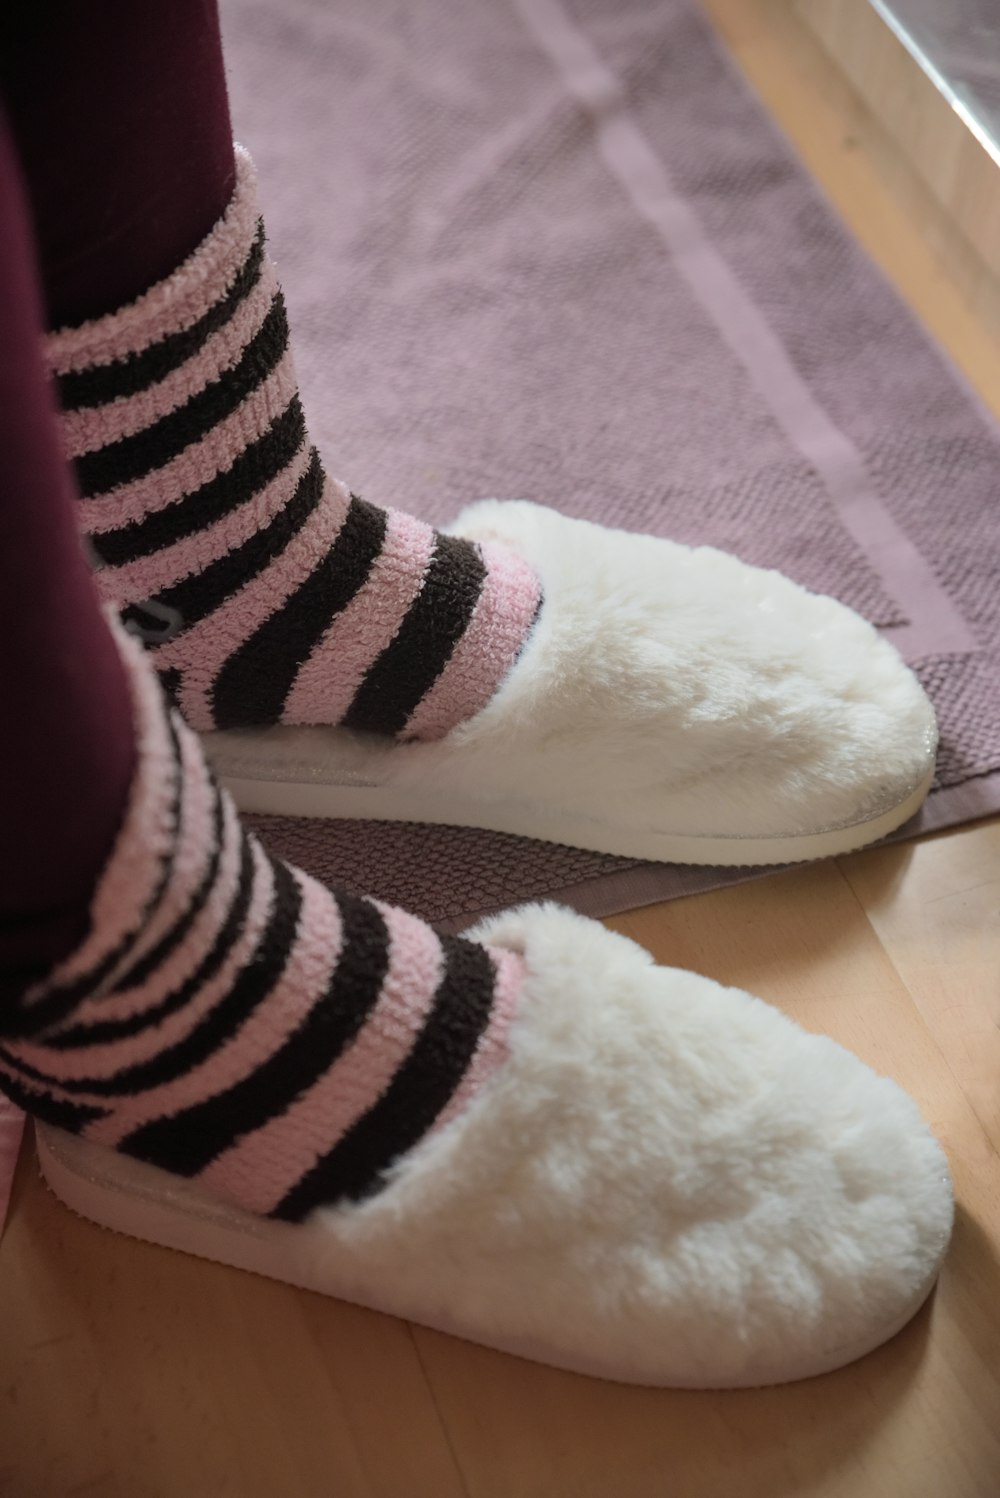 person wearing white bedroom slippers